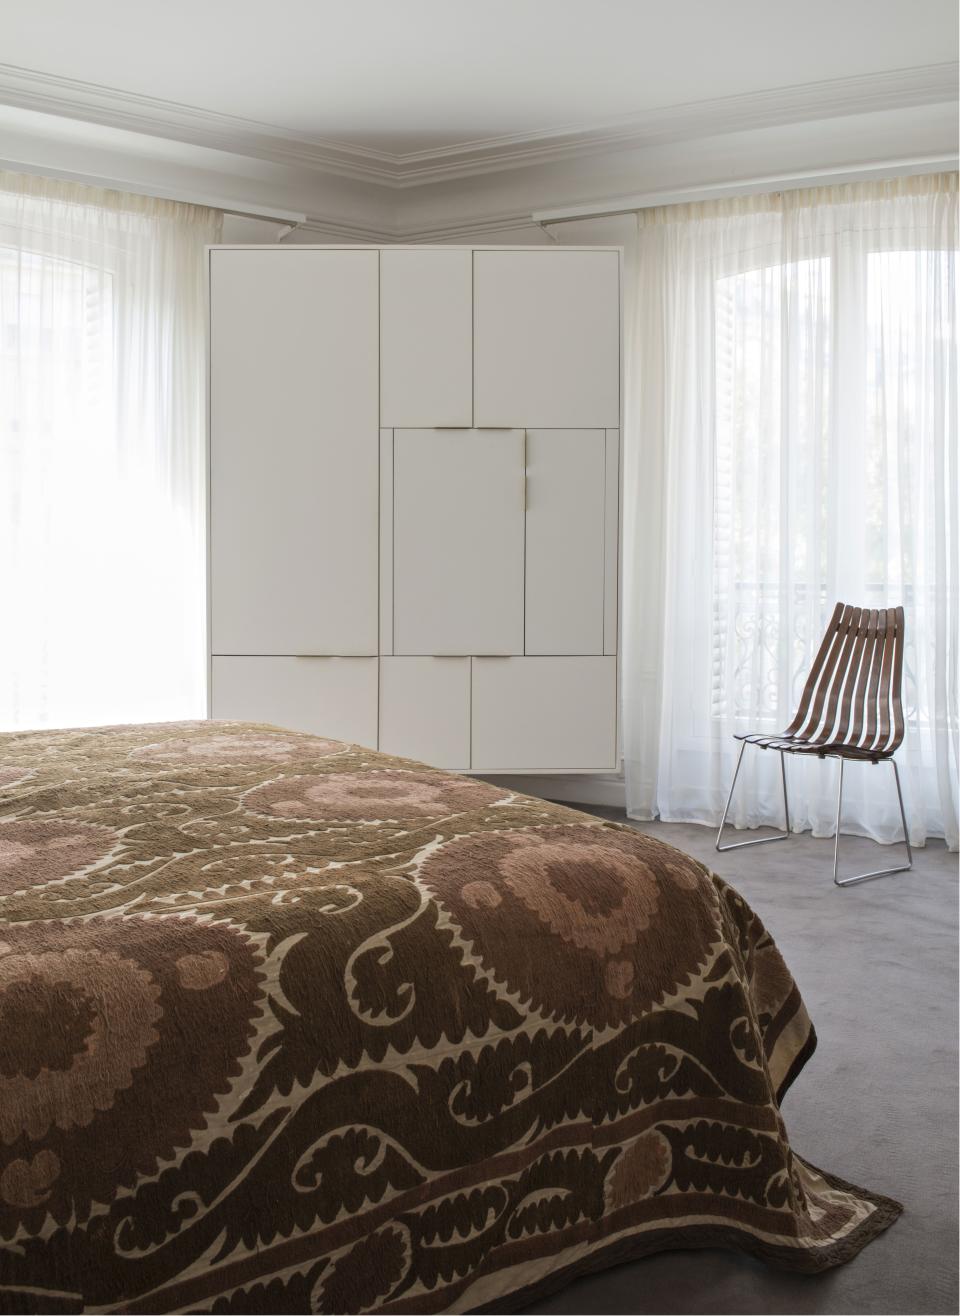 All of the bedrooms are lined up one after the other, with windows overlooking the street. Edmond Petit fabric and Codimat carpeting were once again used. On the bed is a Suzani spread while the rosewood chair was designed by Hans Brattrud. Dupuis created the closets and storage areas.